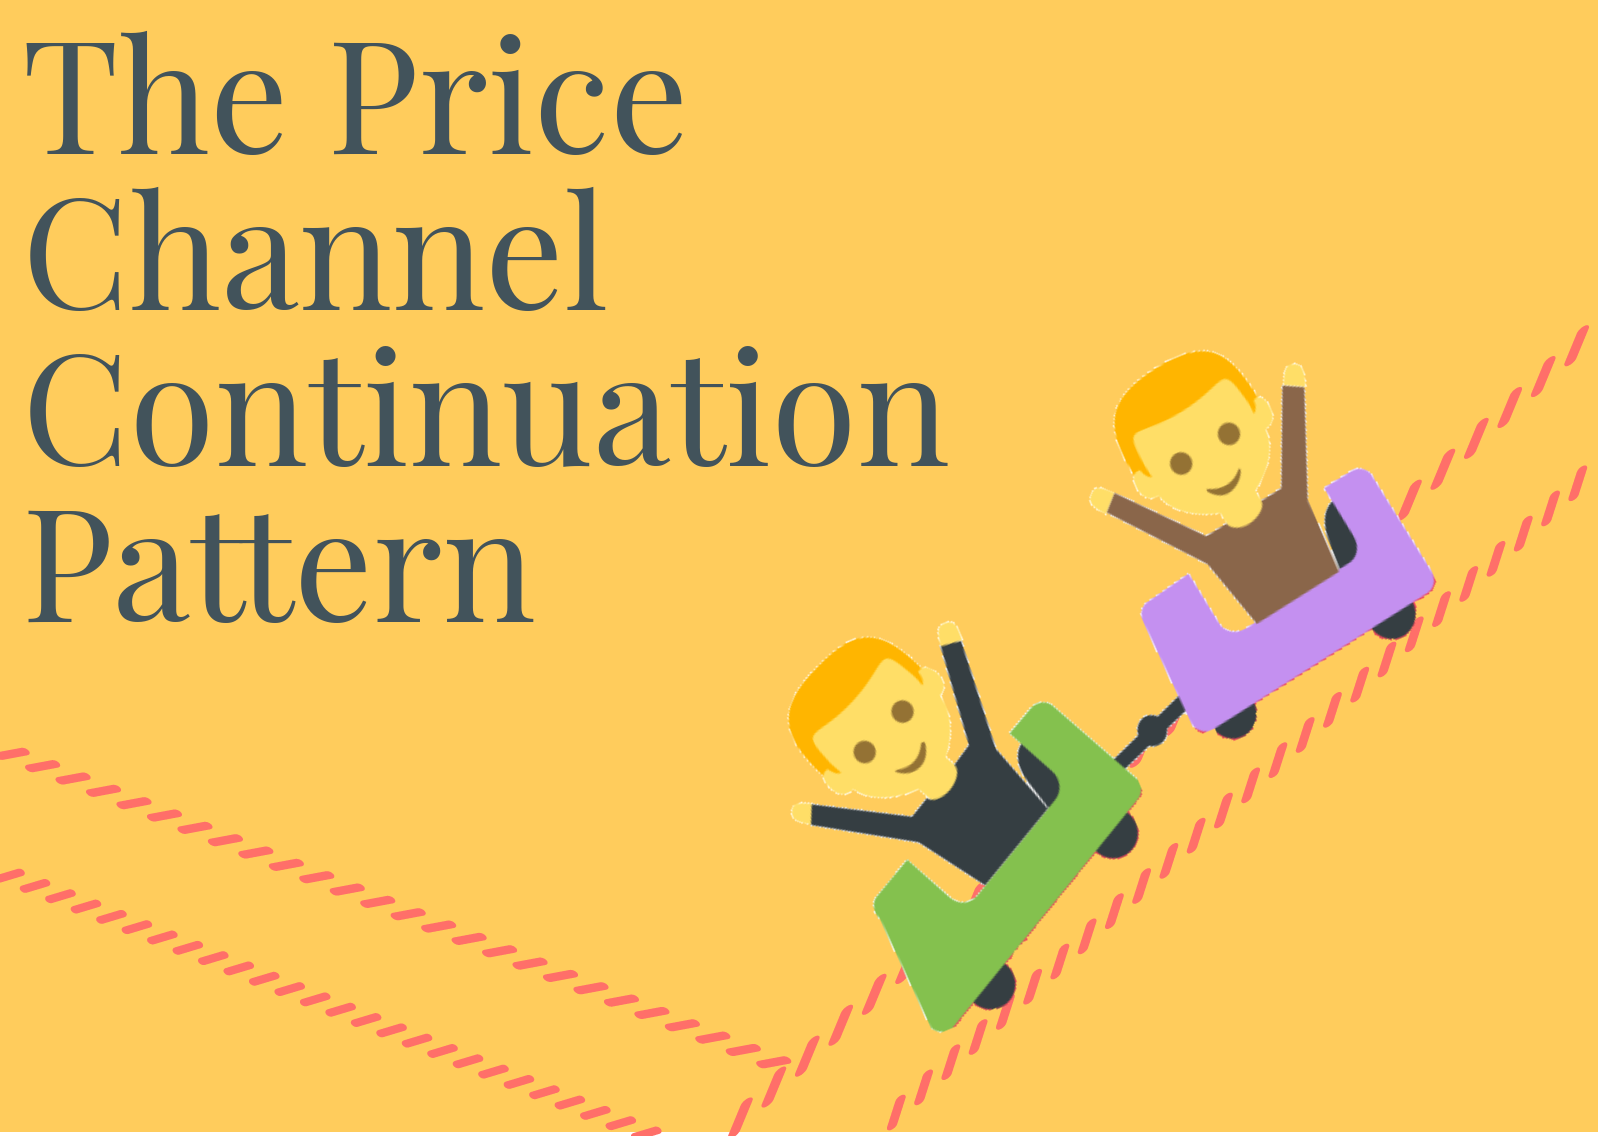 Price channel continuation pattern